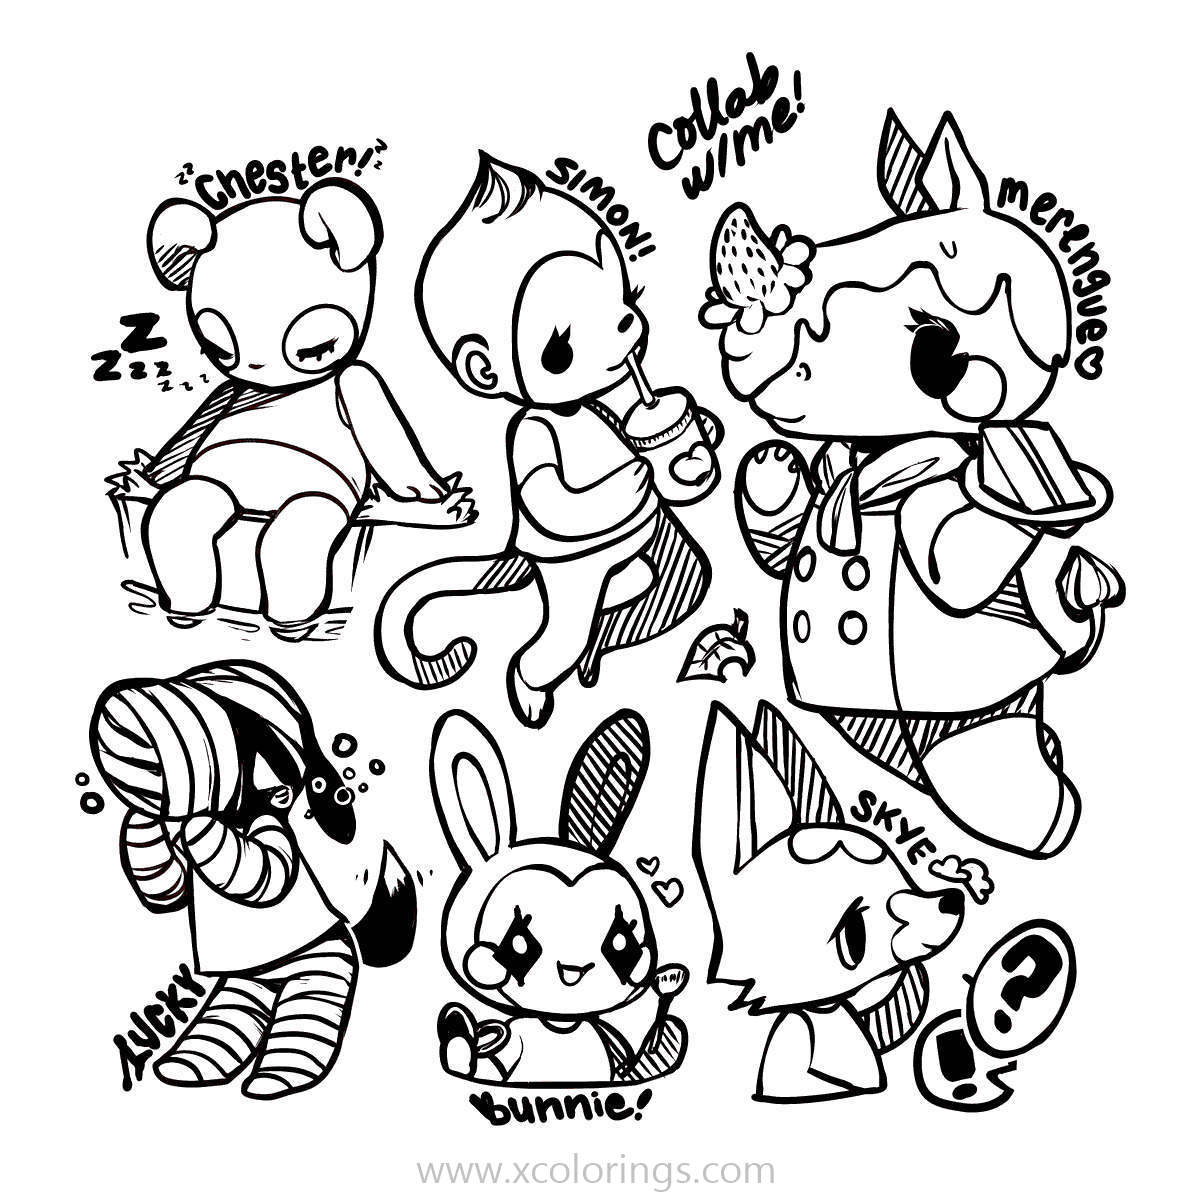 Free Cute Animal Crossing Coloring Pages printable